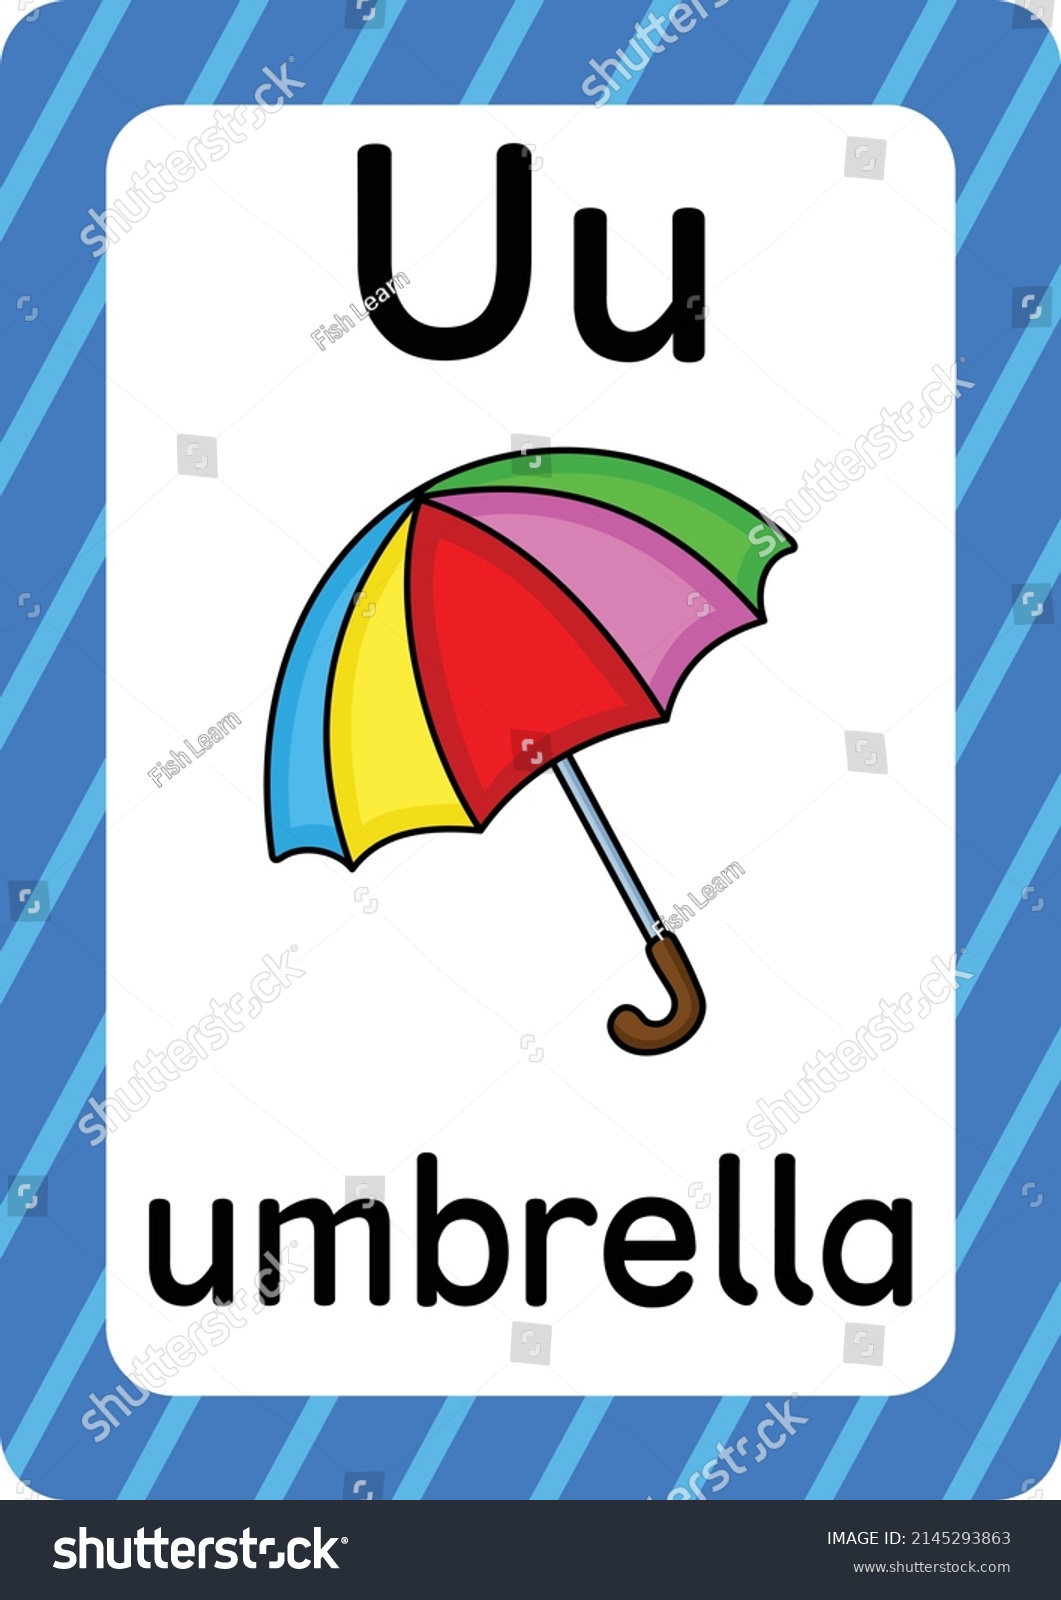 1,055 Pictures of umbrellas to print Images, Stock Photos & Vectors ...